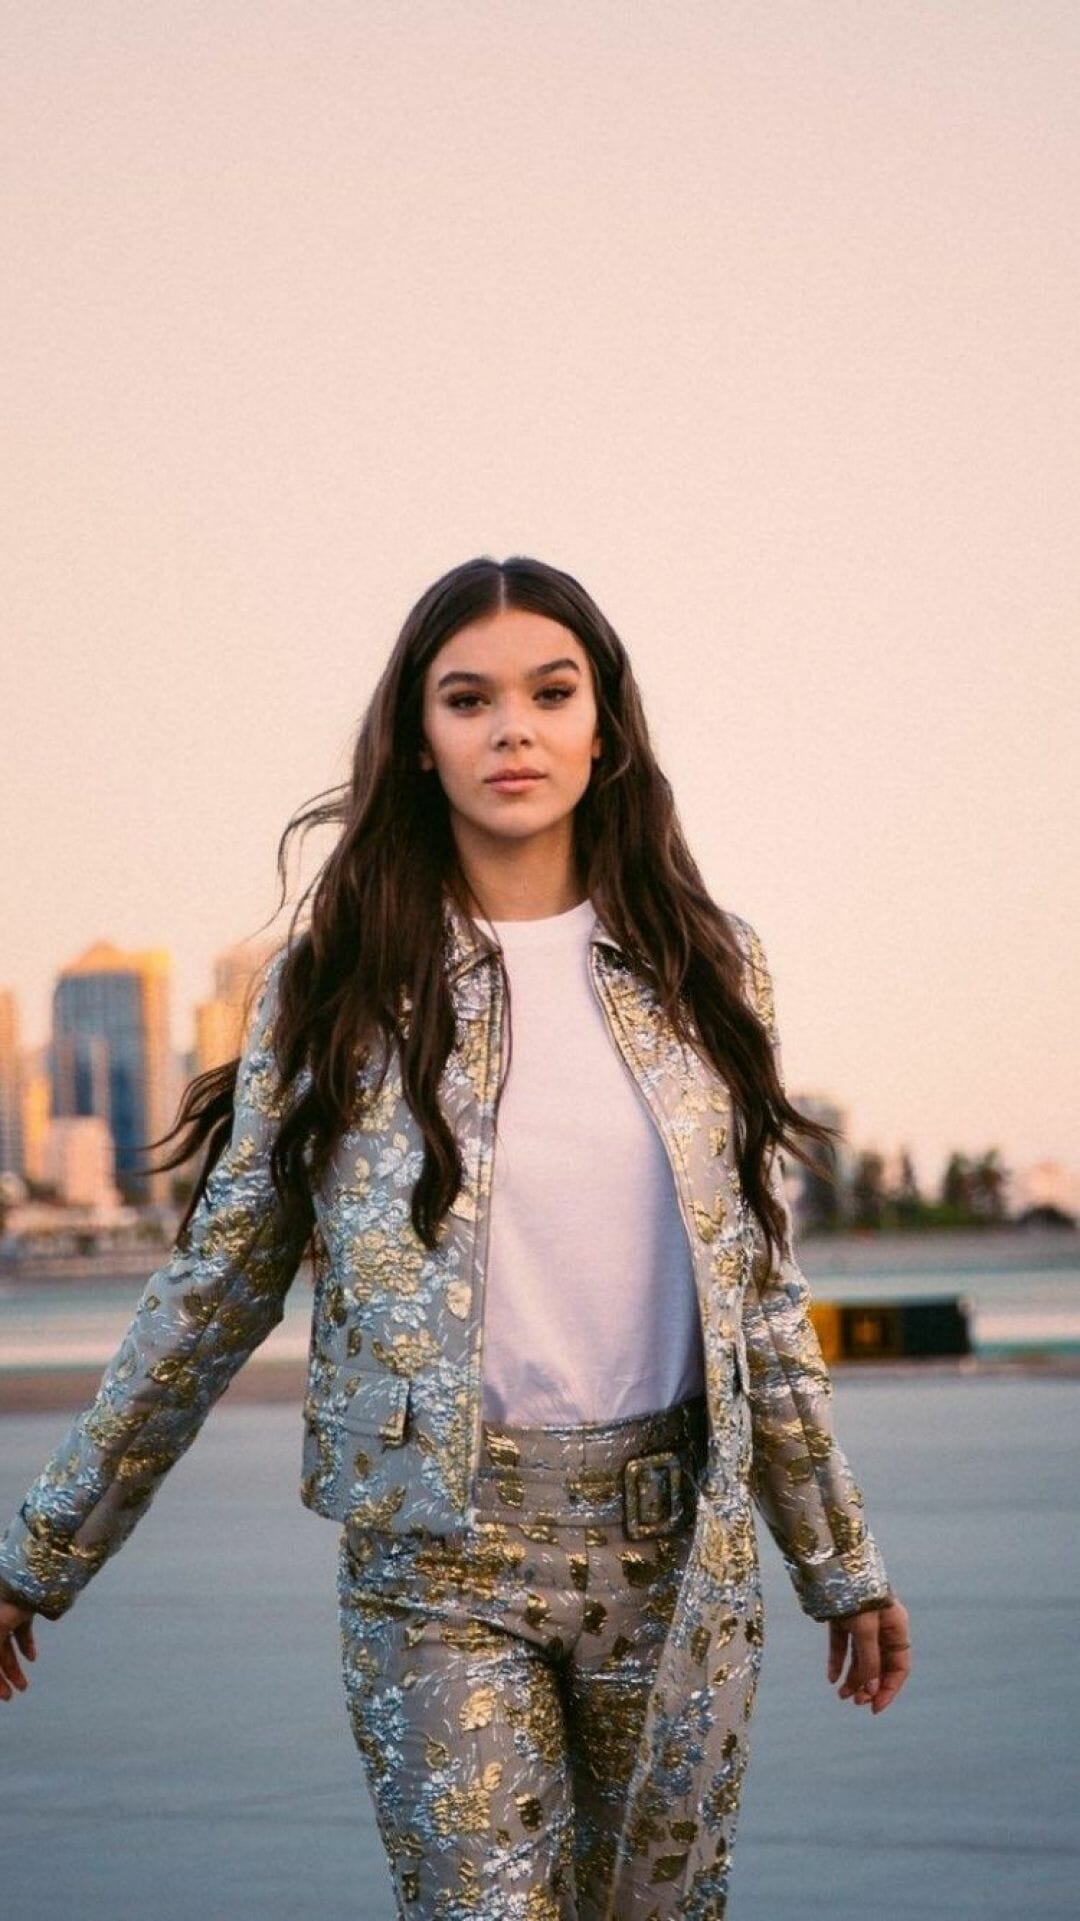 Actress Hailee Steinfeld 2021 Wallpapers